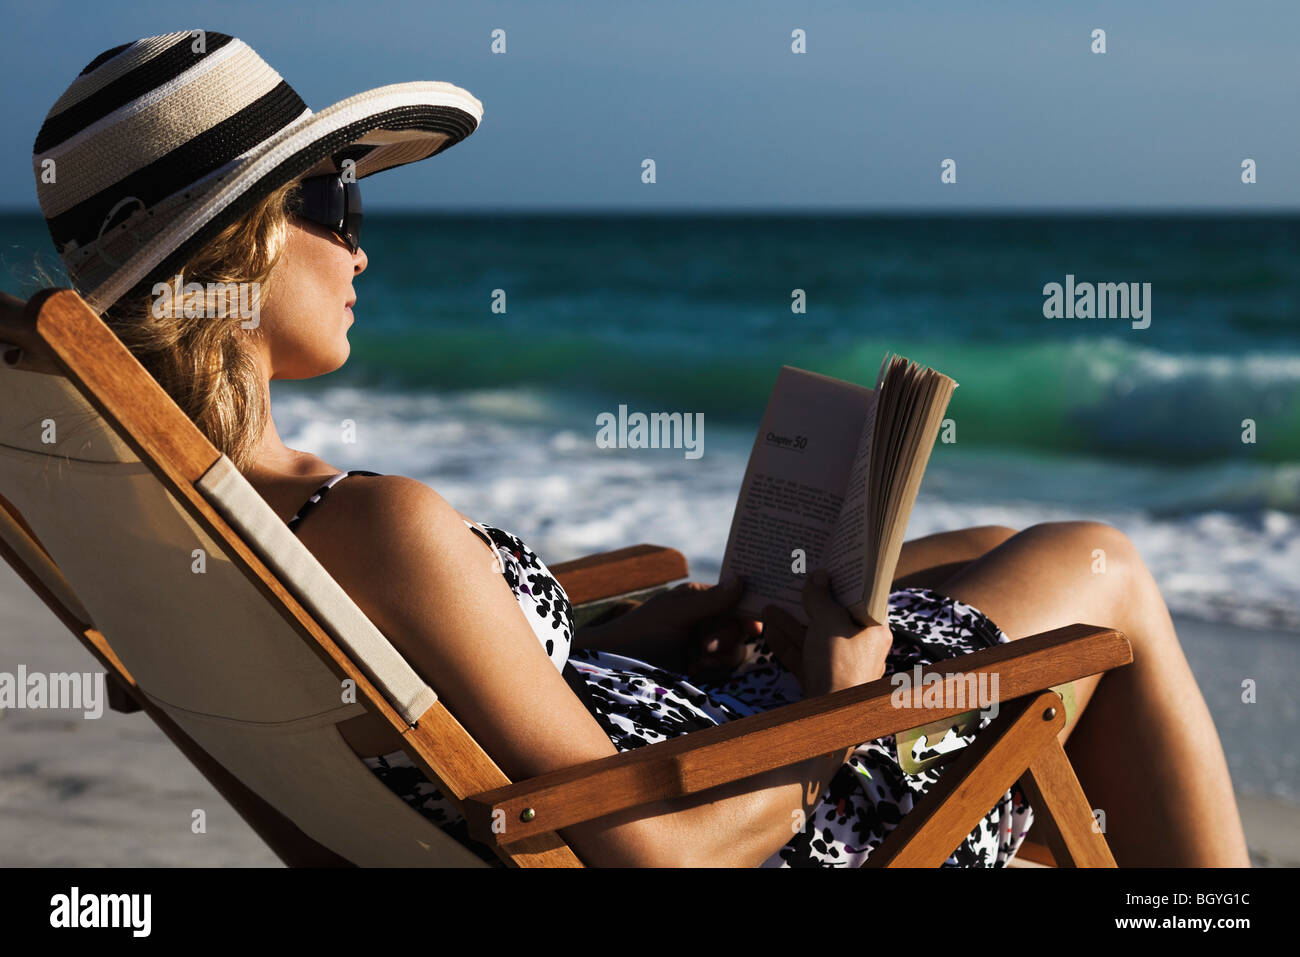 Woman relaxing in deckchair at beach, reading book Stock Photo